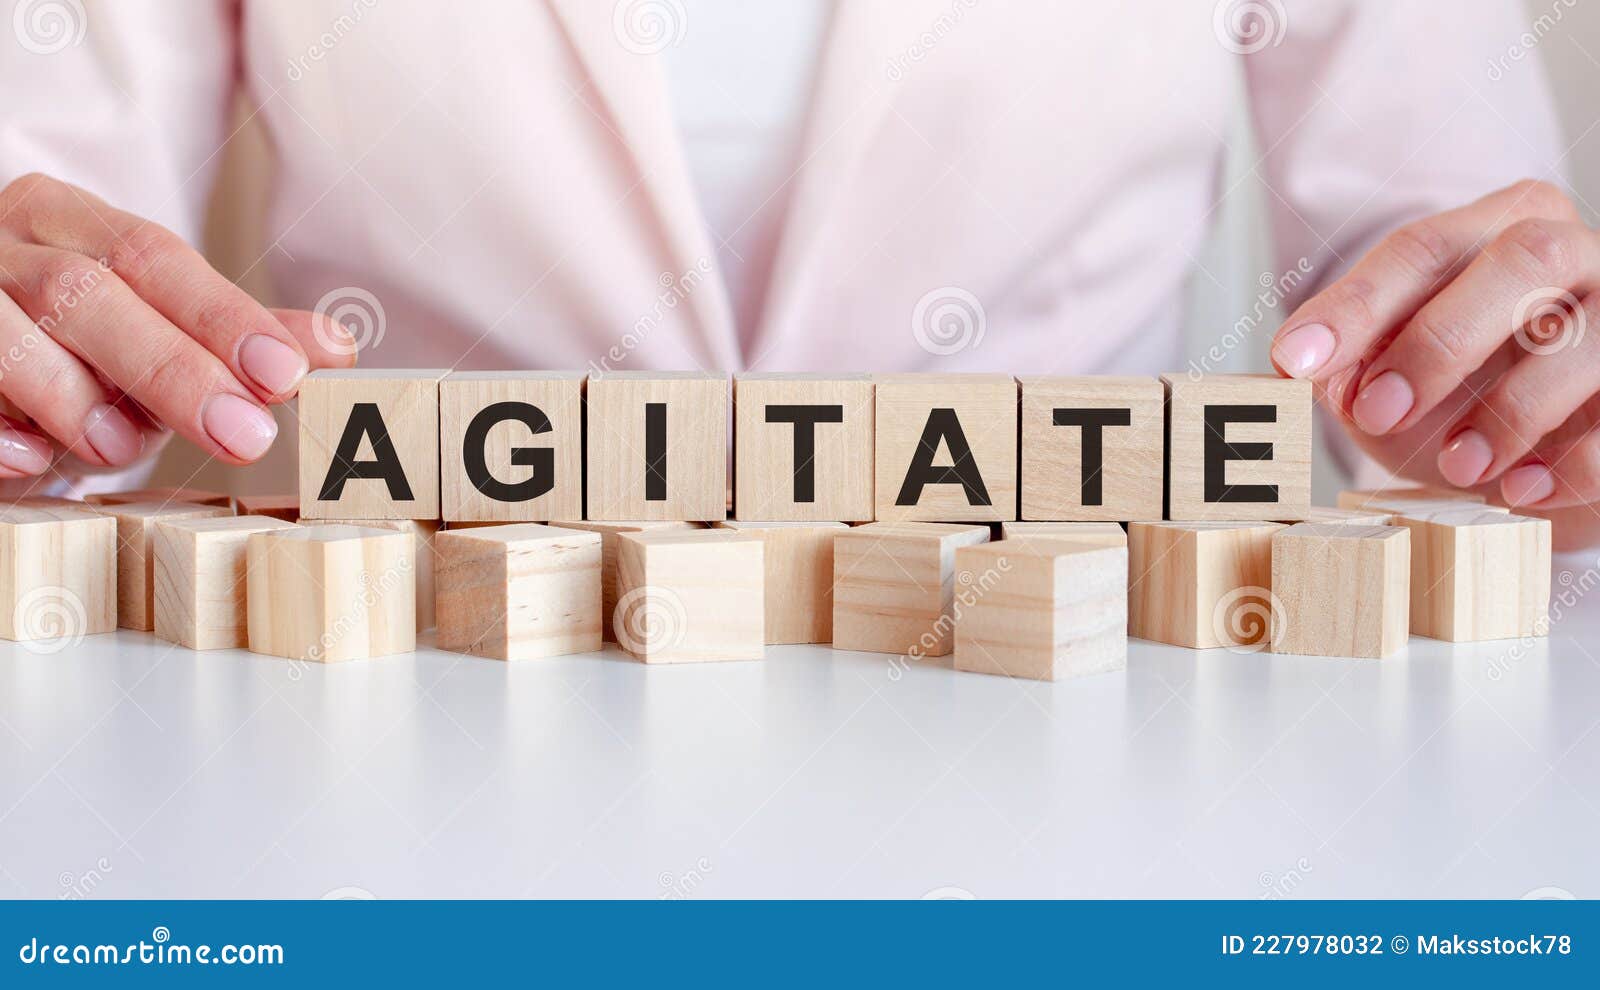 woman made word agitate with wooden blocks